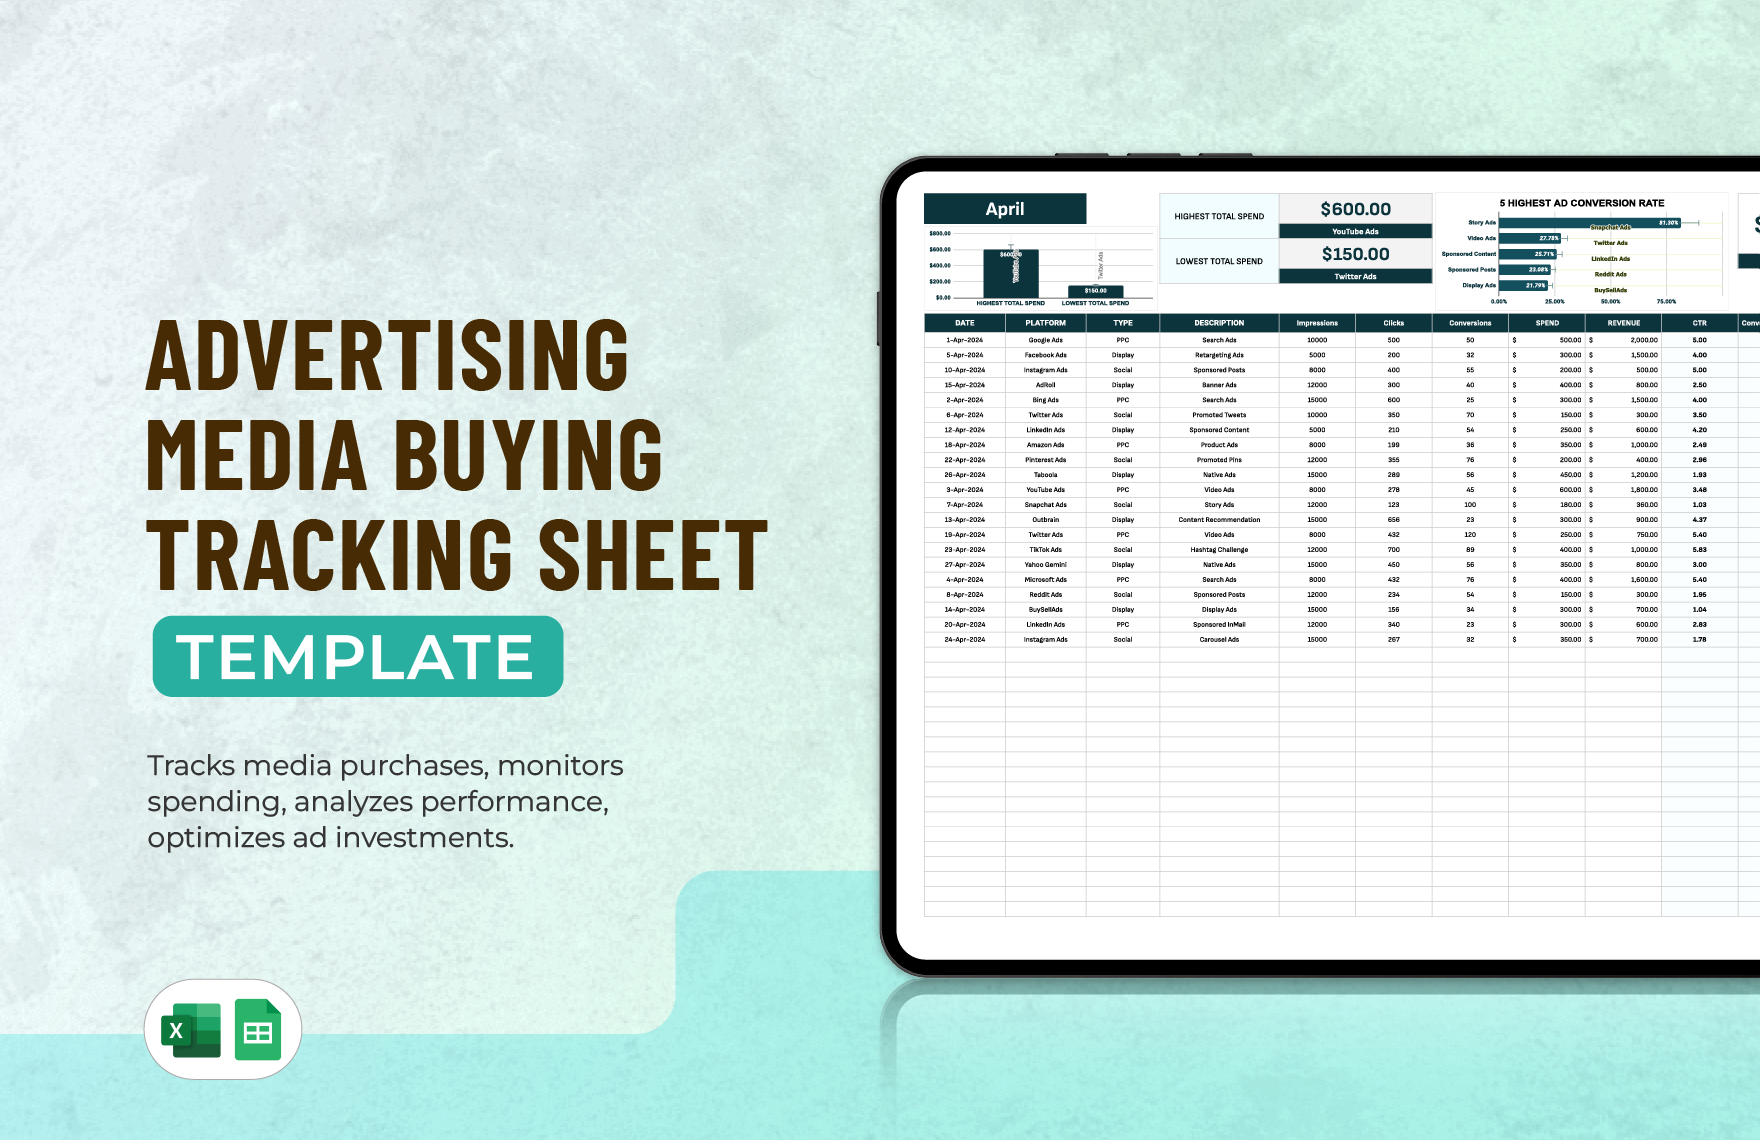 Advertising Media Buying Tracking Sheet Template in Excel, Google Sheets